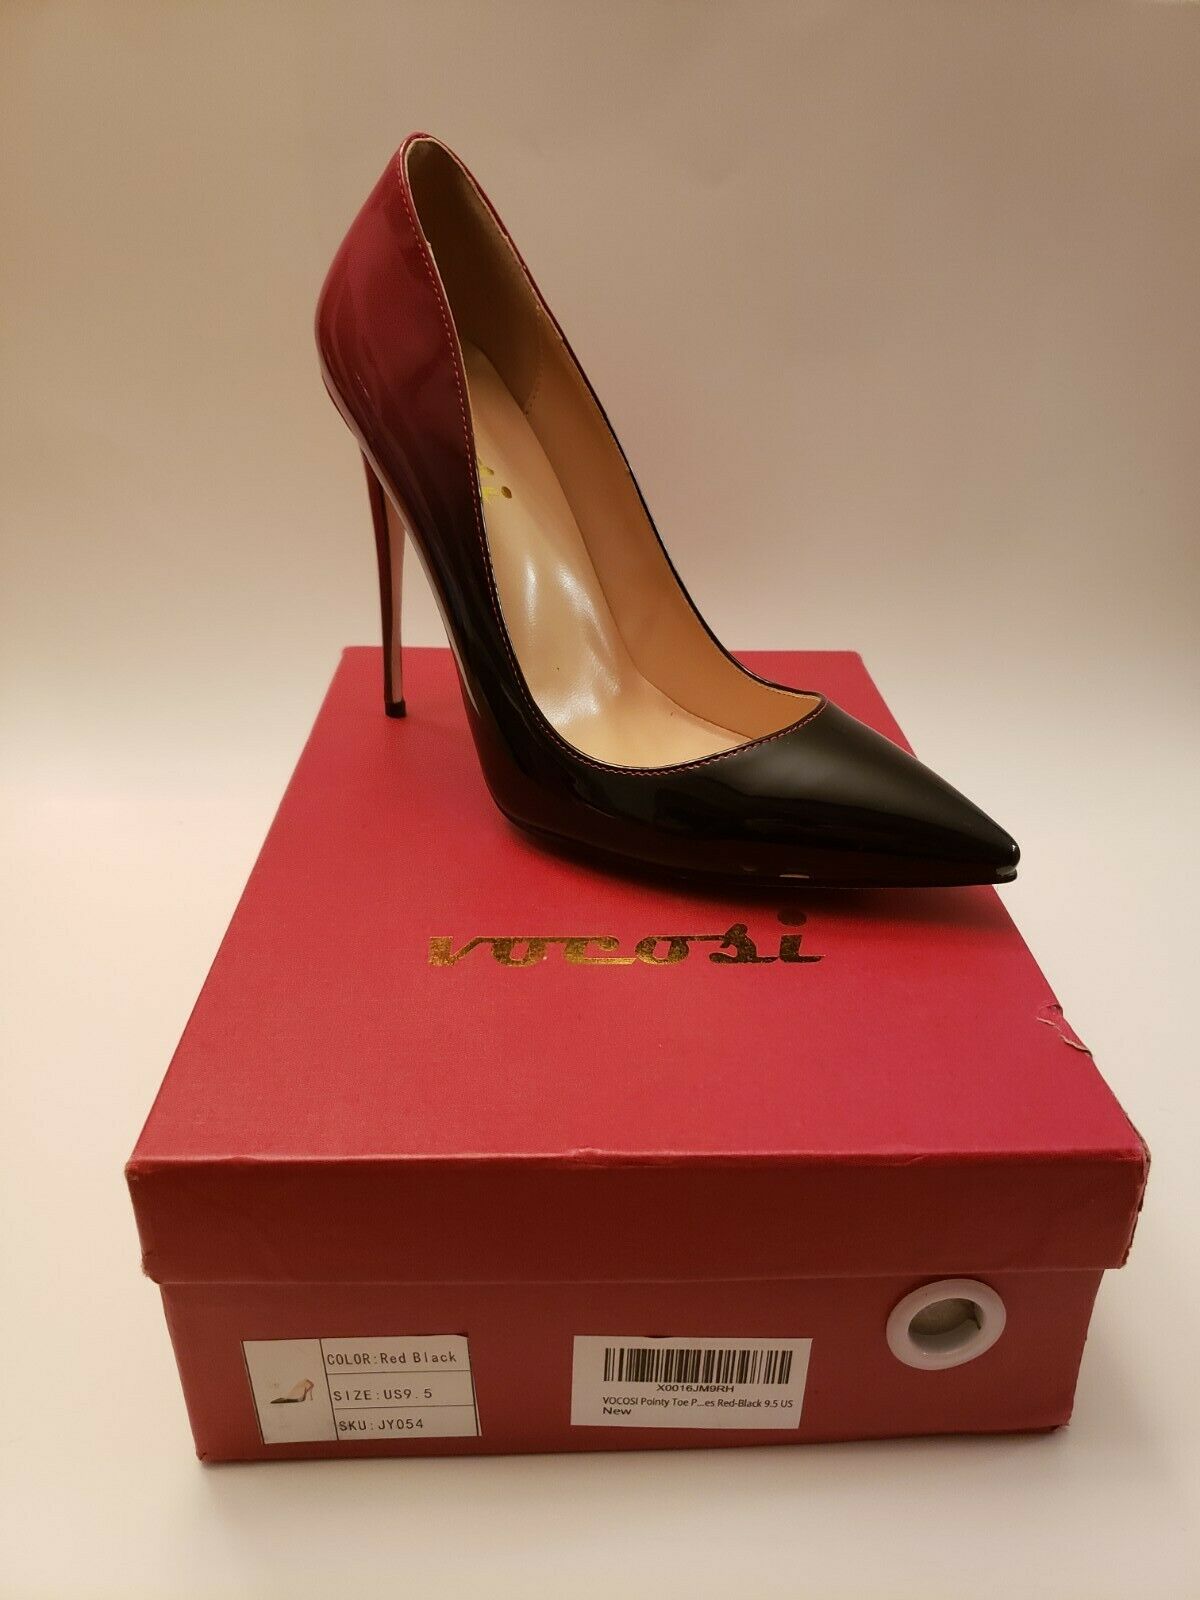 Vocosi Women's Pointy Toe Pumps High Heel Shoes Gradient Red/Black Size 9.5 US